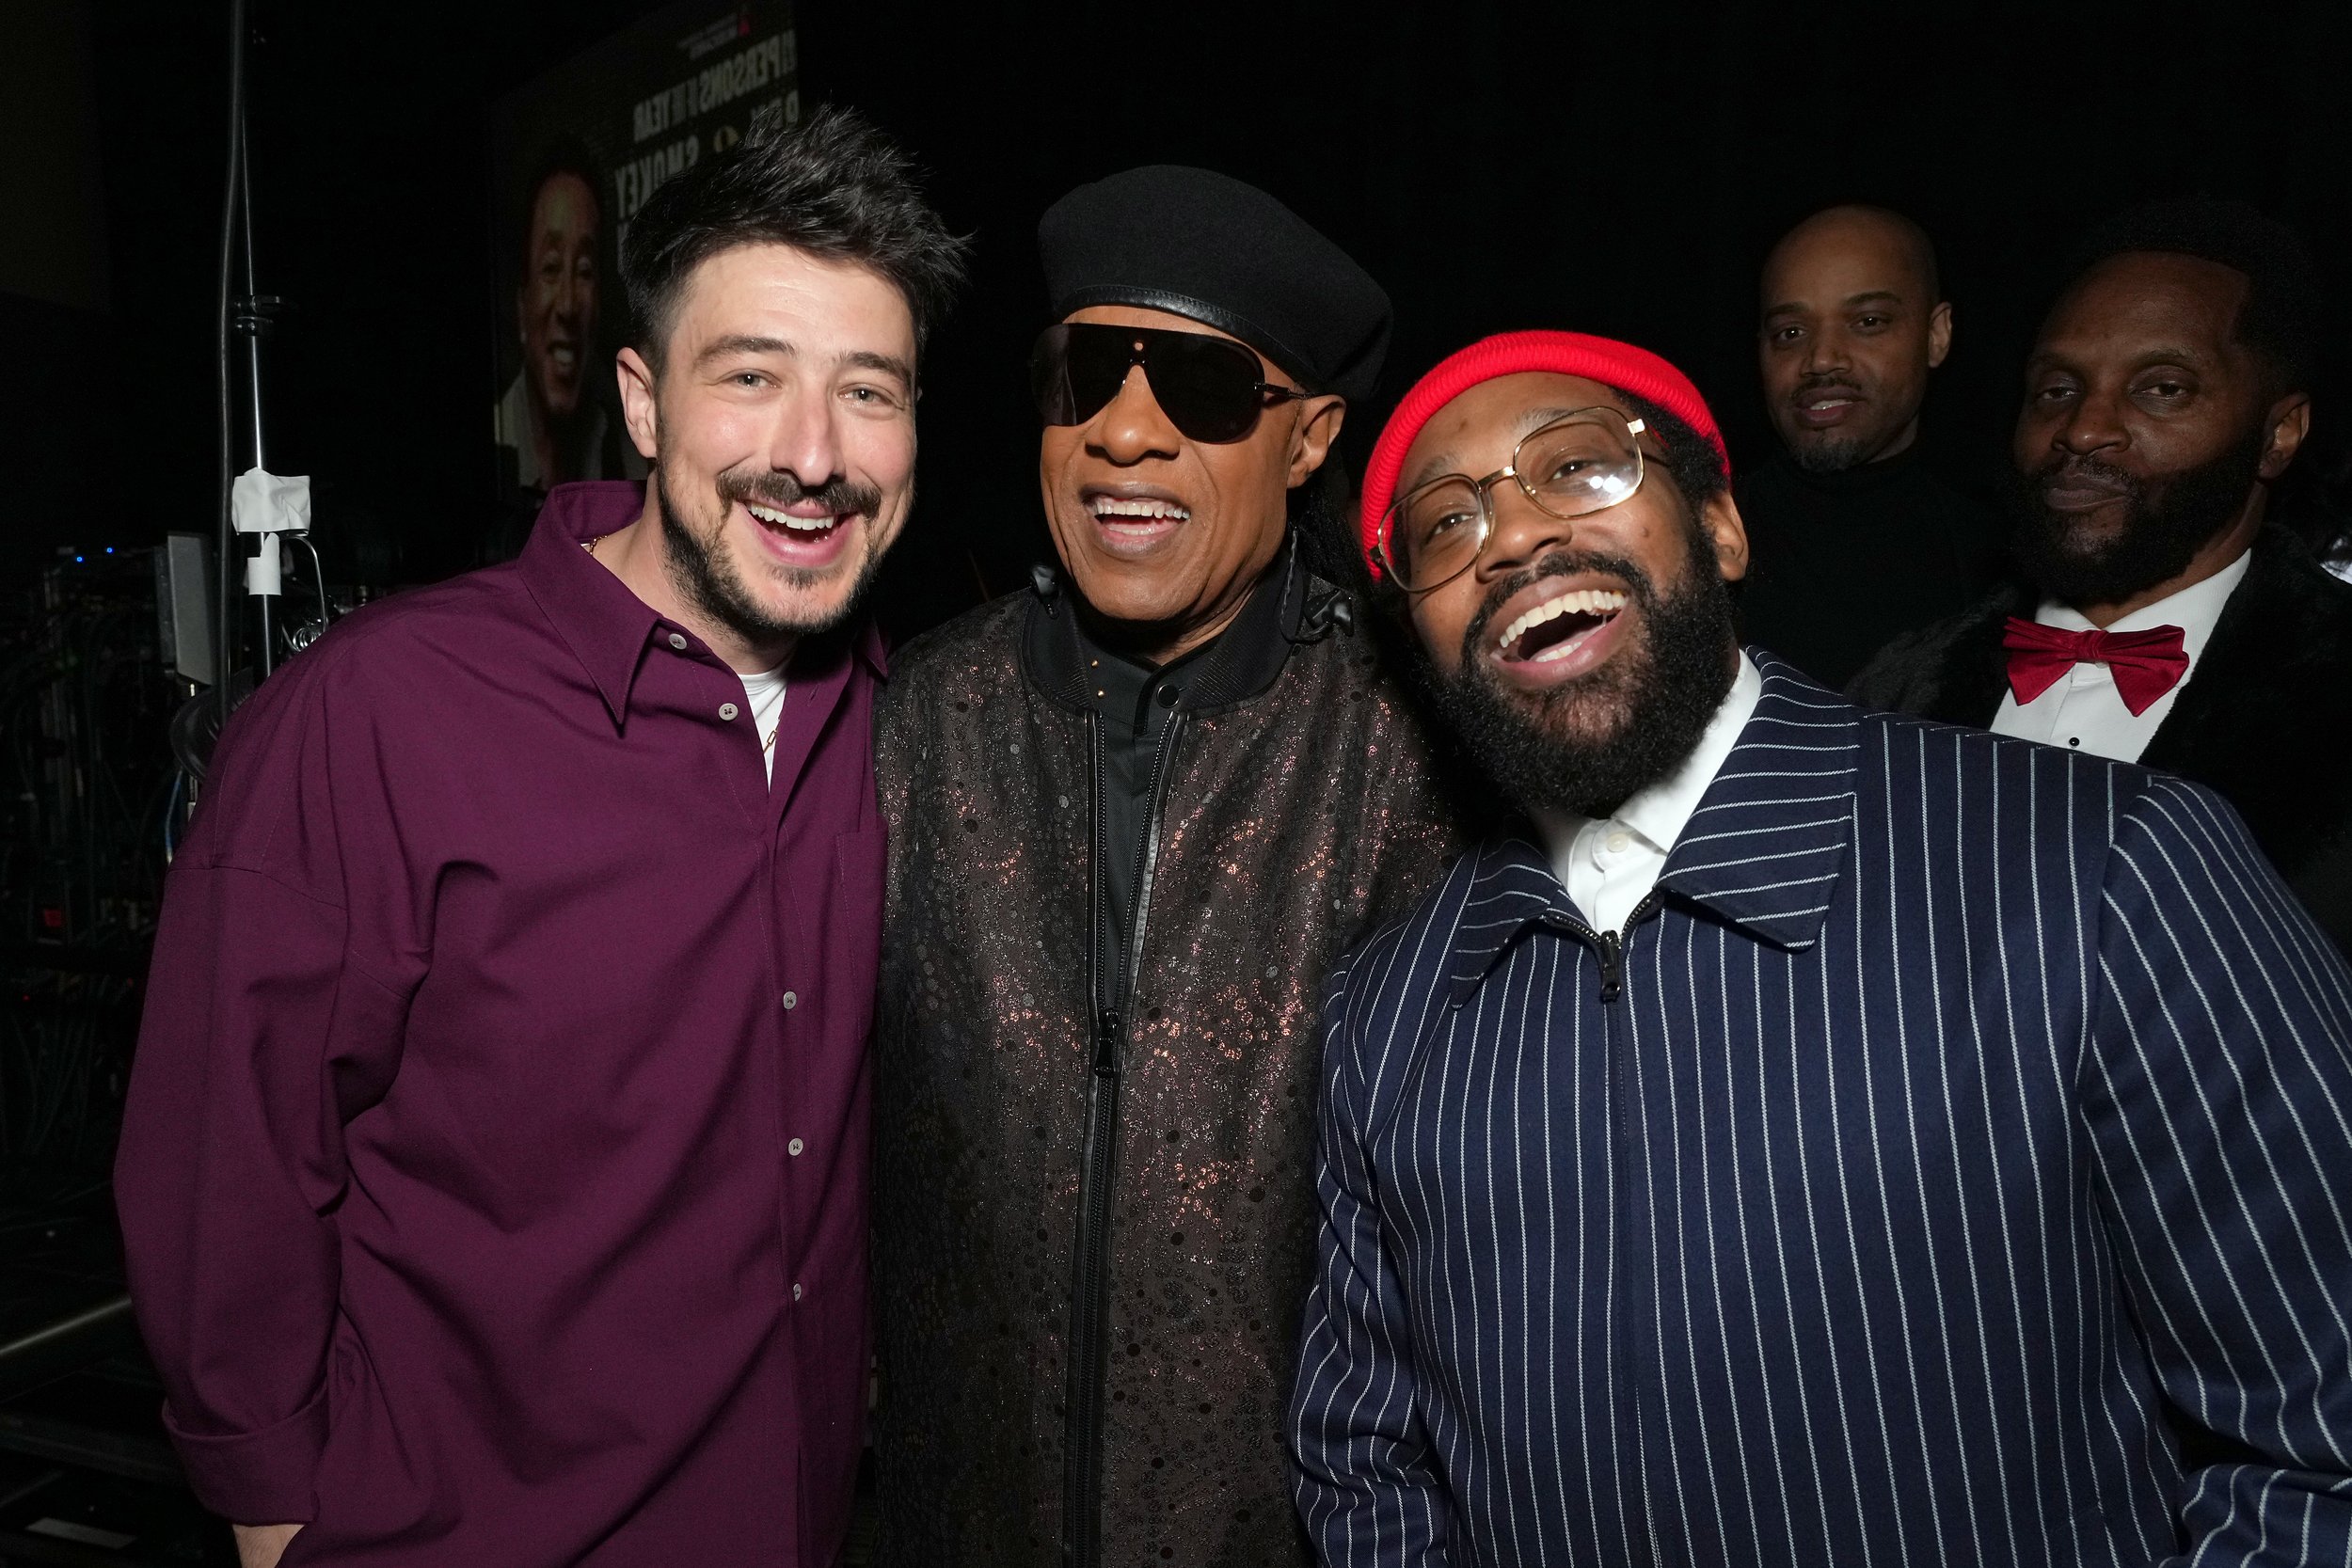  LOS ANGELES, CALIFORNIA - FEBRUARY 03: (L-R) Marcus Mumford, Stevie Wonder and PJ Morton attend MusiCares Persons of the Year Honoring Berry Gordy and Smokey Robinson at Los Angeles Convention Center on February 03, 2023 in Los Angeles, California. 